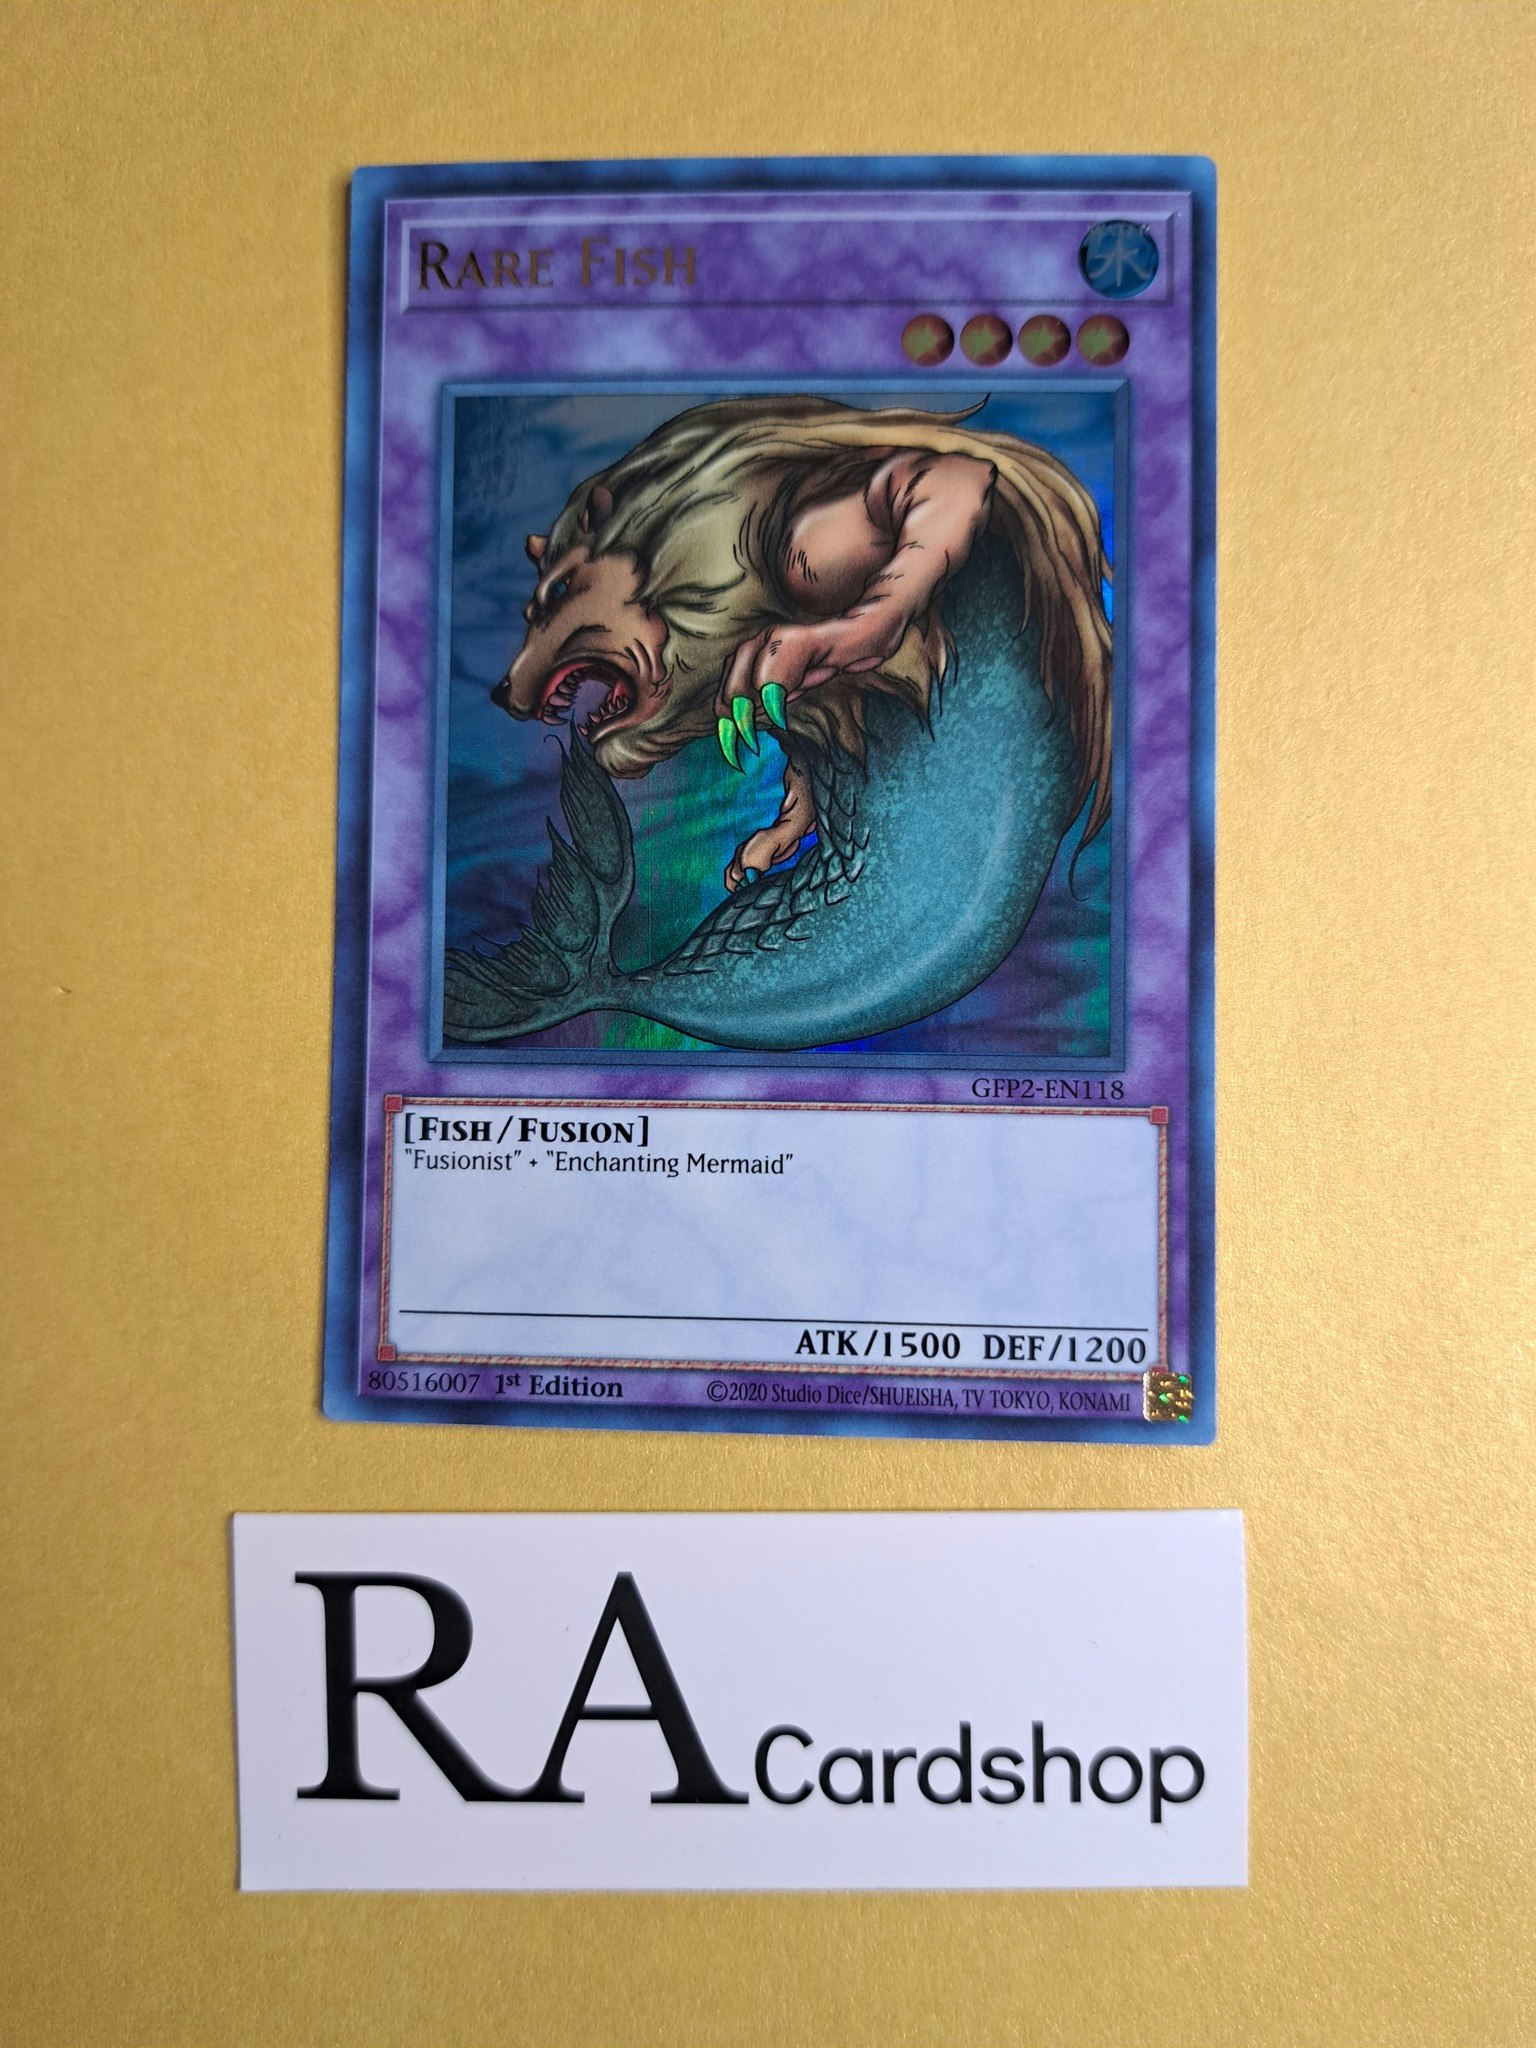 Rare Fish 1st Edition EN118 Ghosts From the Past: The 2nd Haunting GFP2 Yu-Gi-Oh